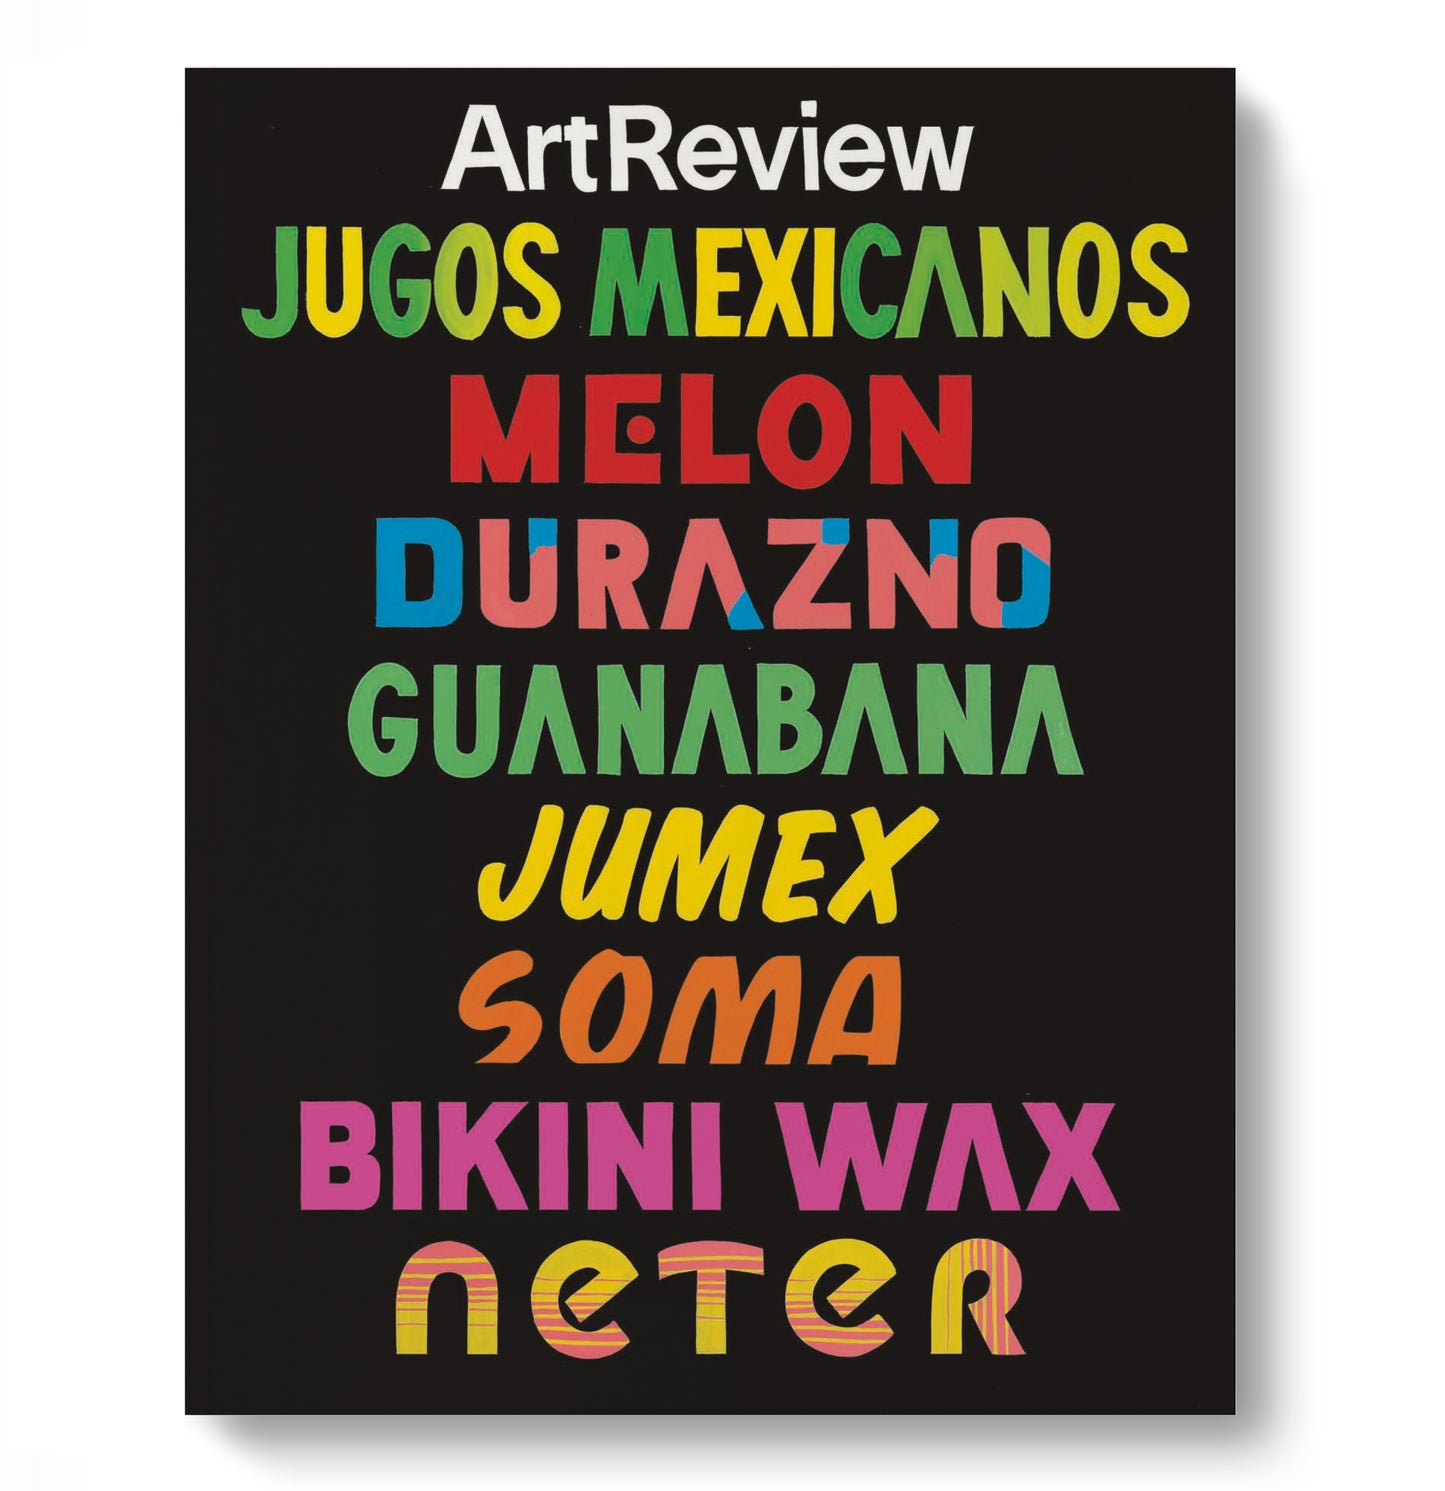 ArtReview January & February 2014